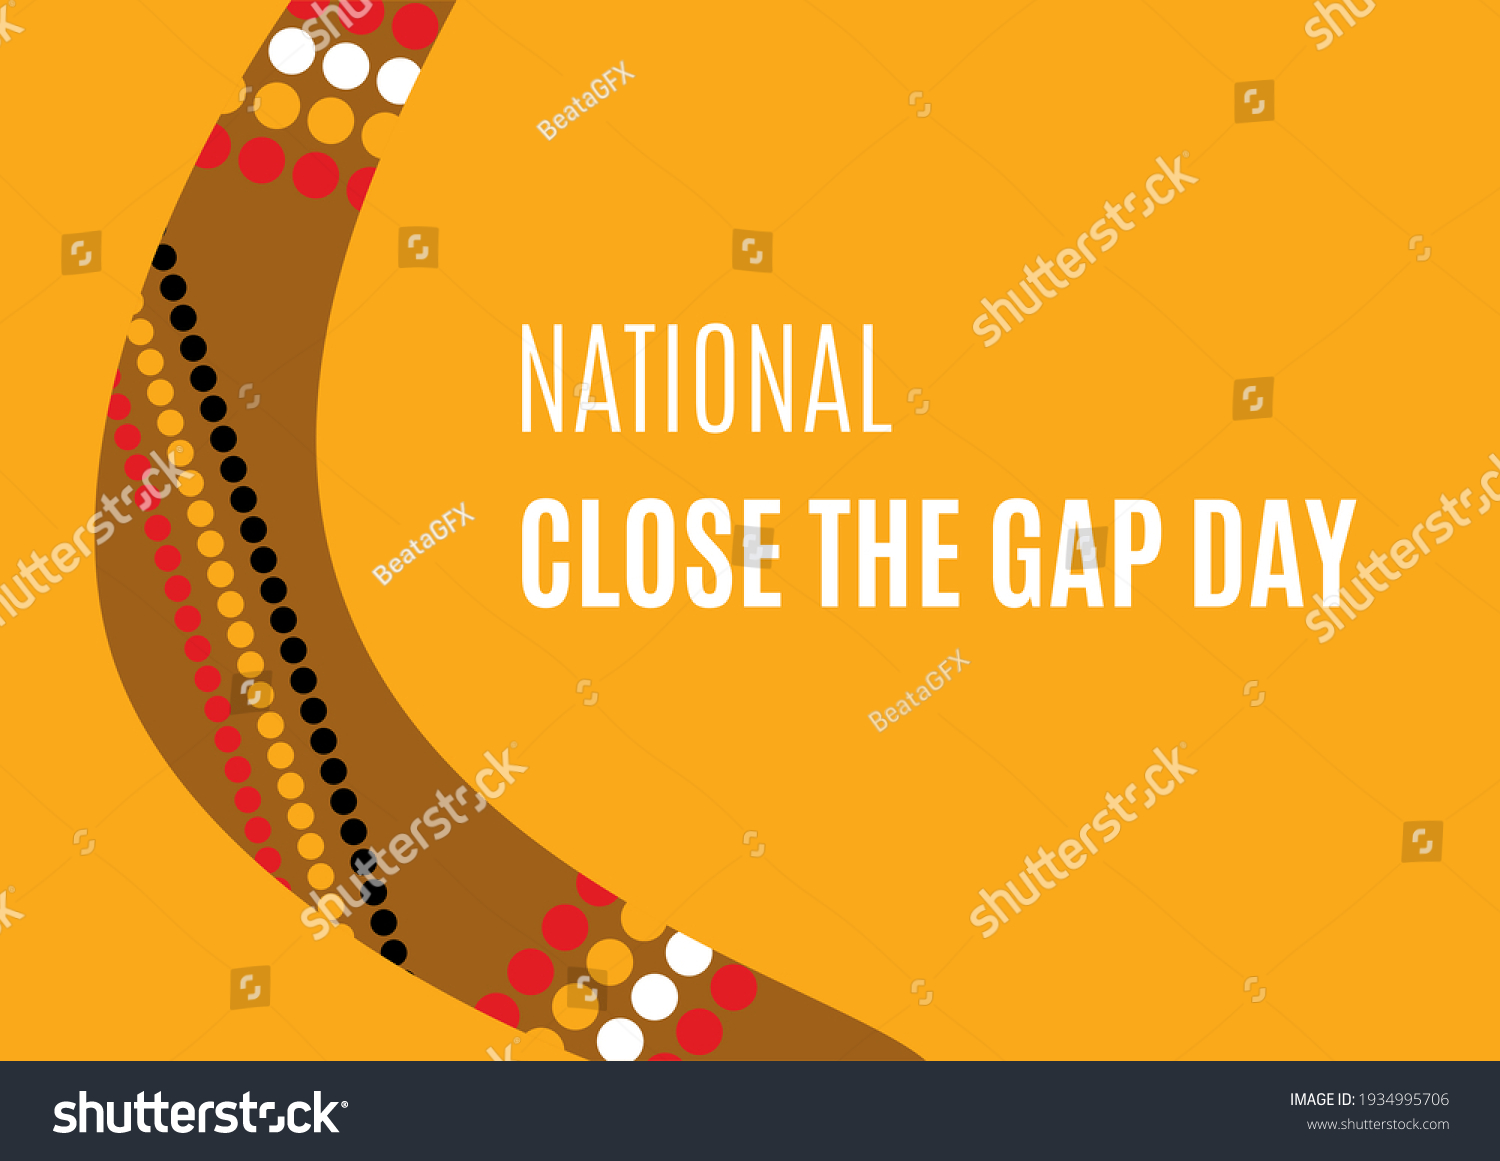 25 National Close The Gap Day Images, Stock Photos & Vectors Shutterstock